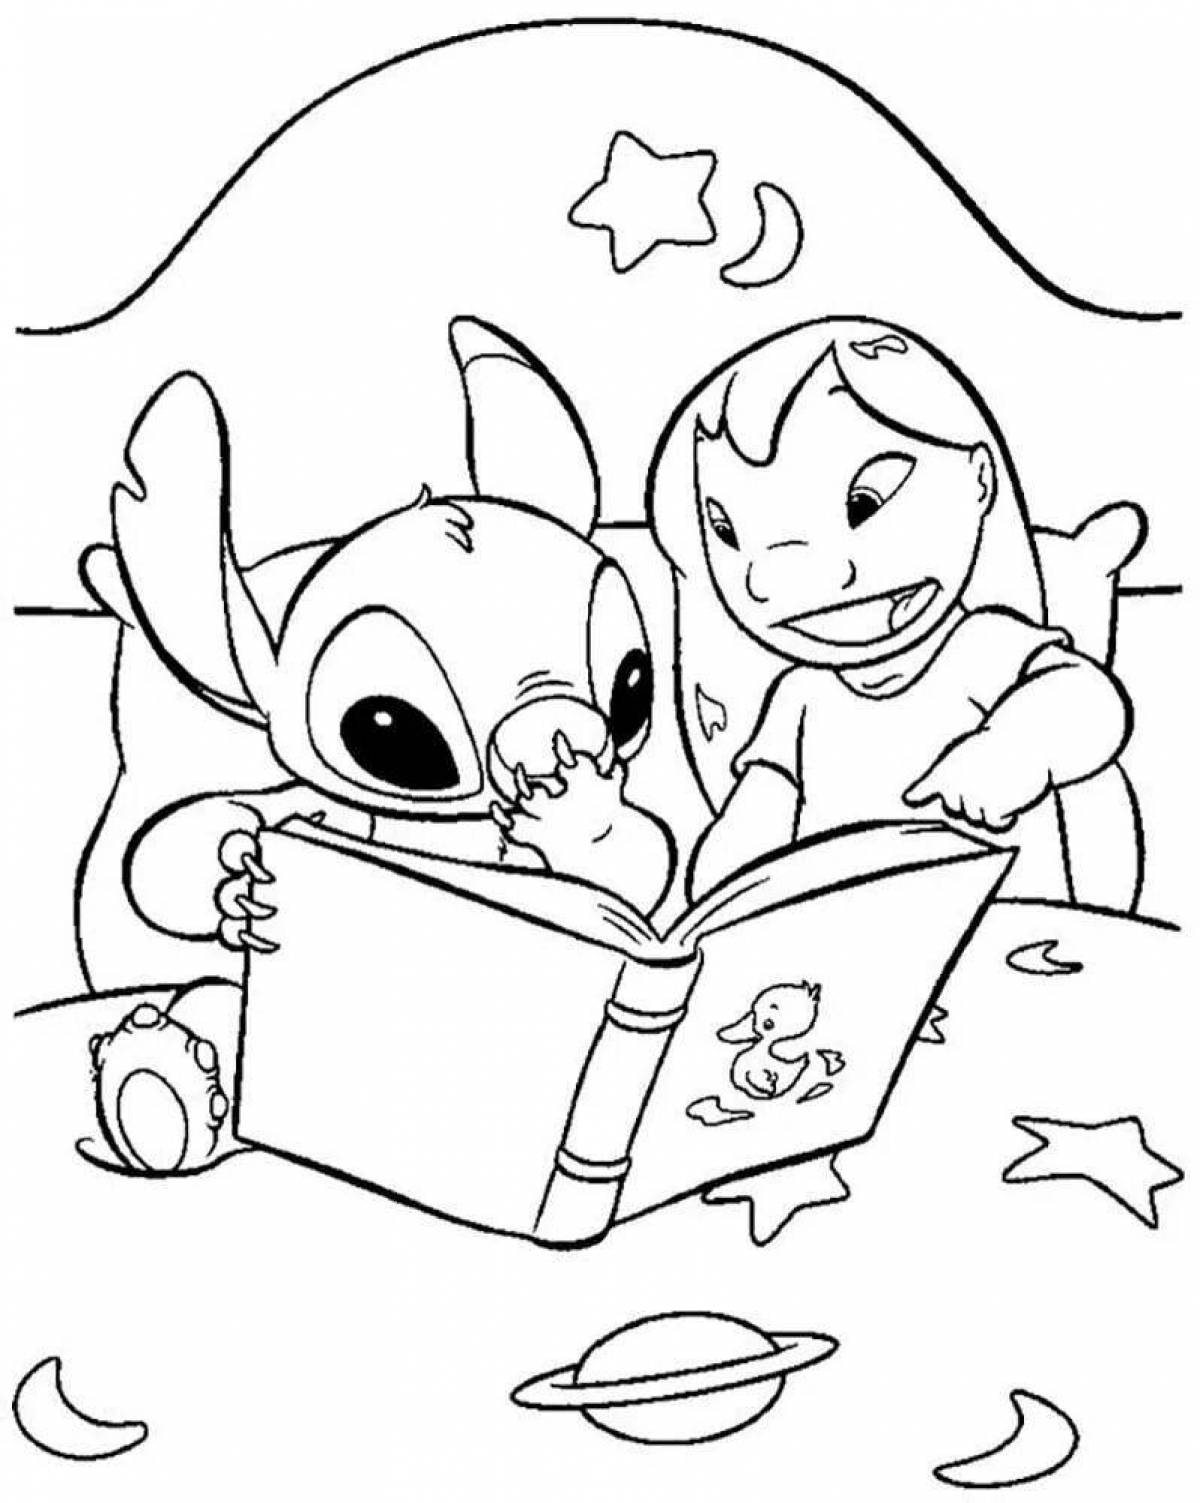 Amazing coloring pages for kids